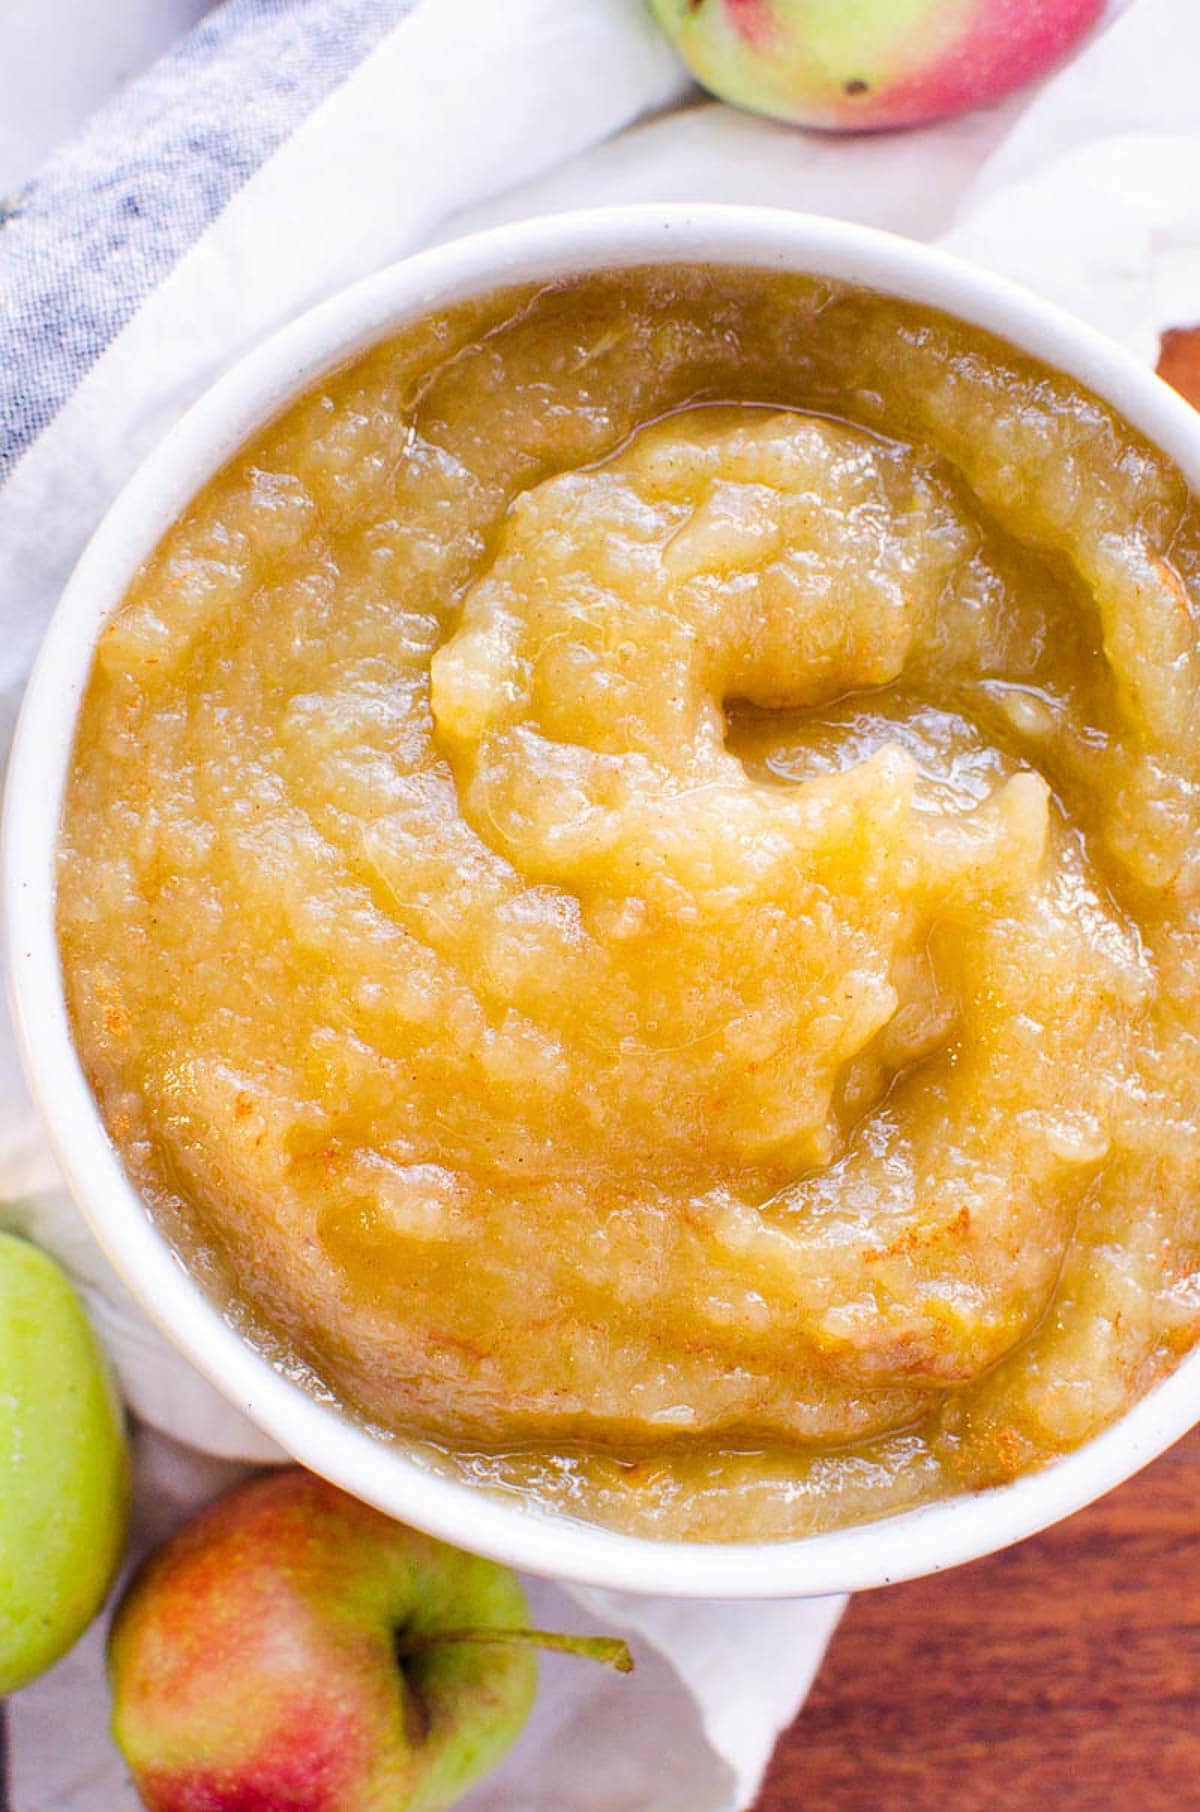 Pressure cooker applesauce in a bowl on a table.